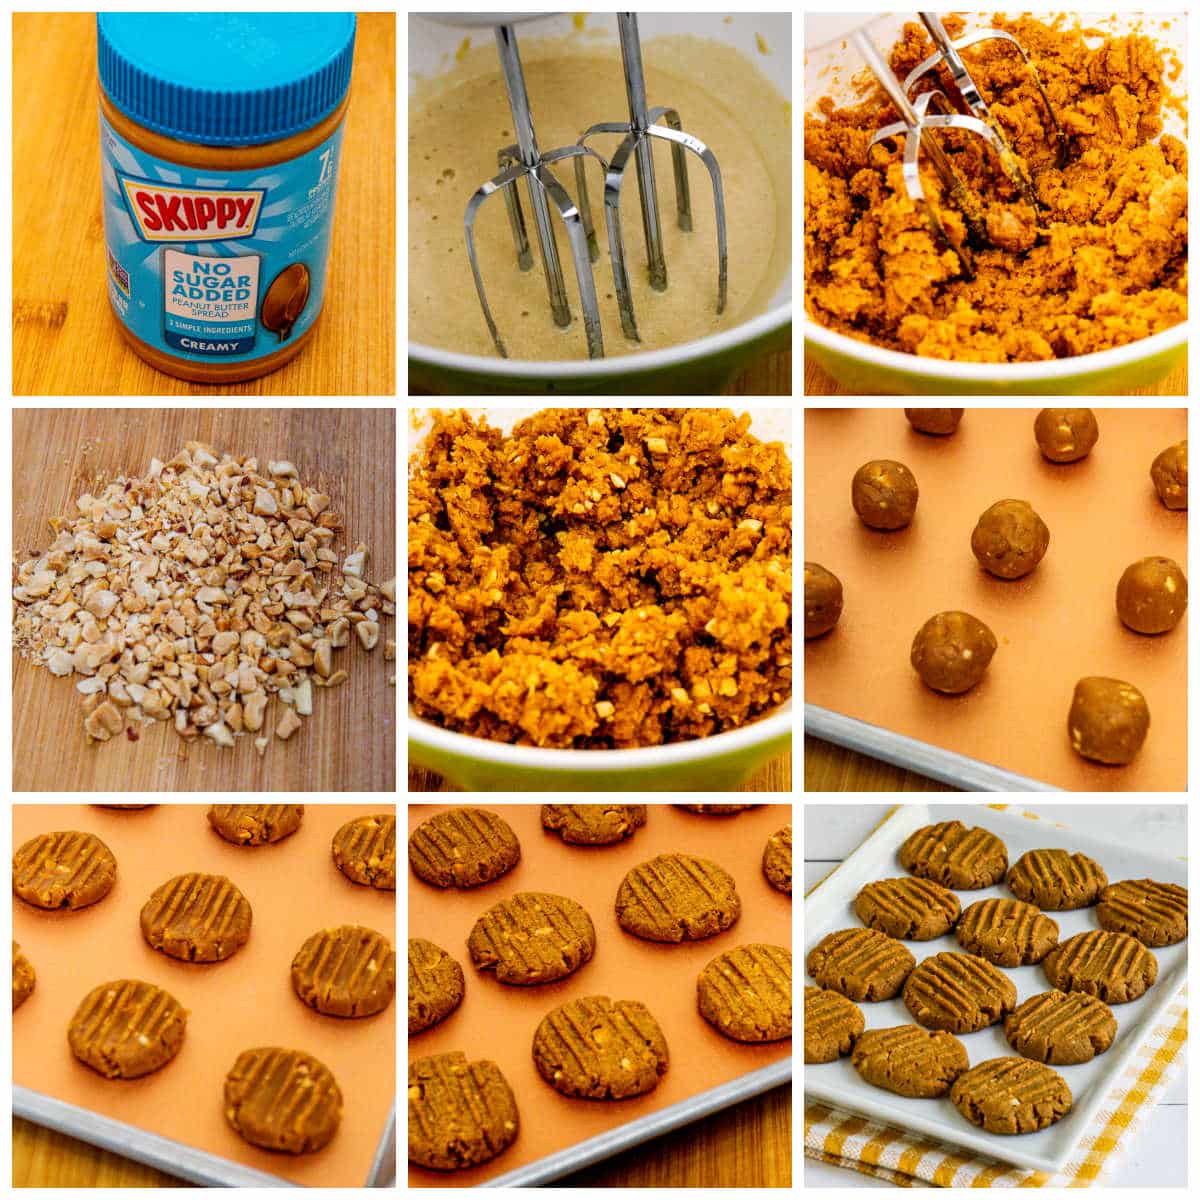 Collage photo of steps for making Sugar-Free Peanut Butter Cookies.